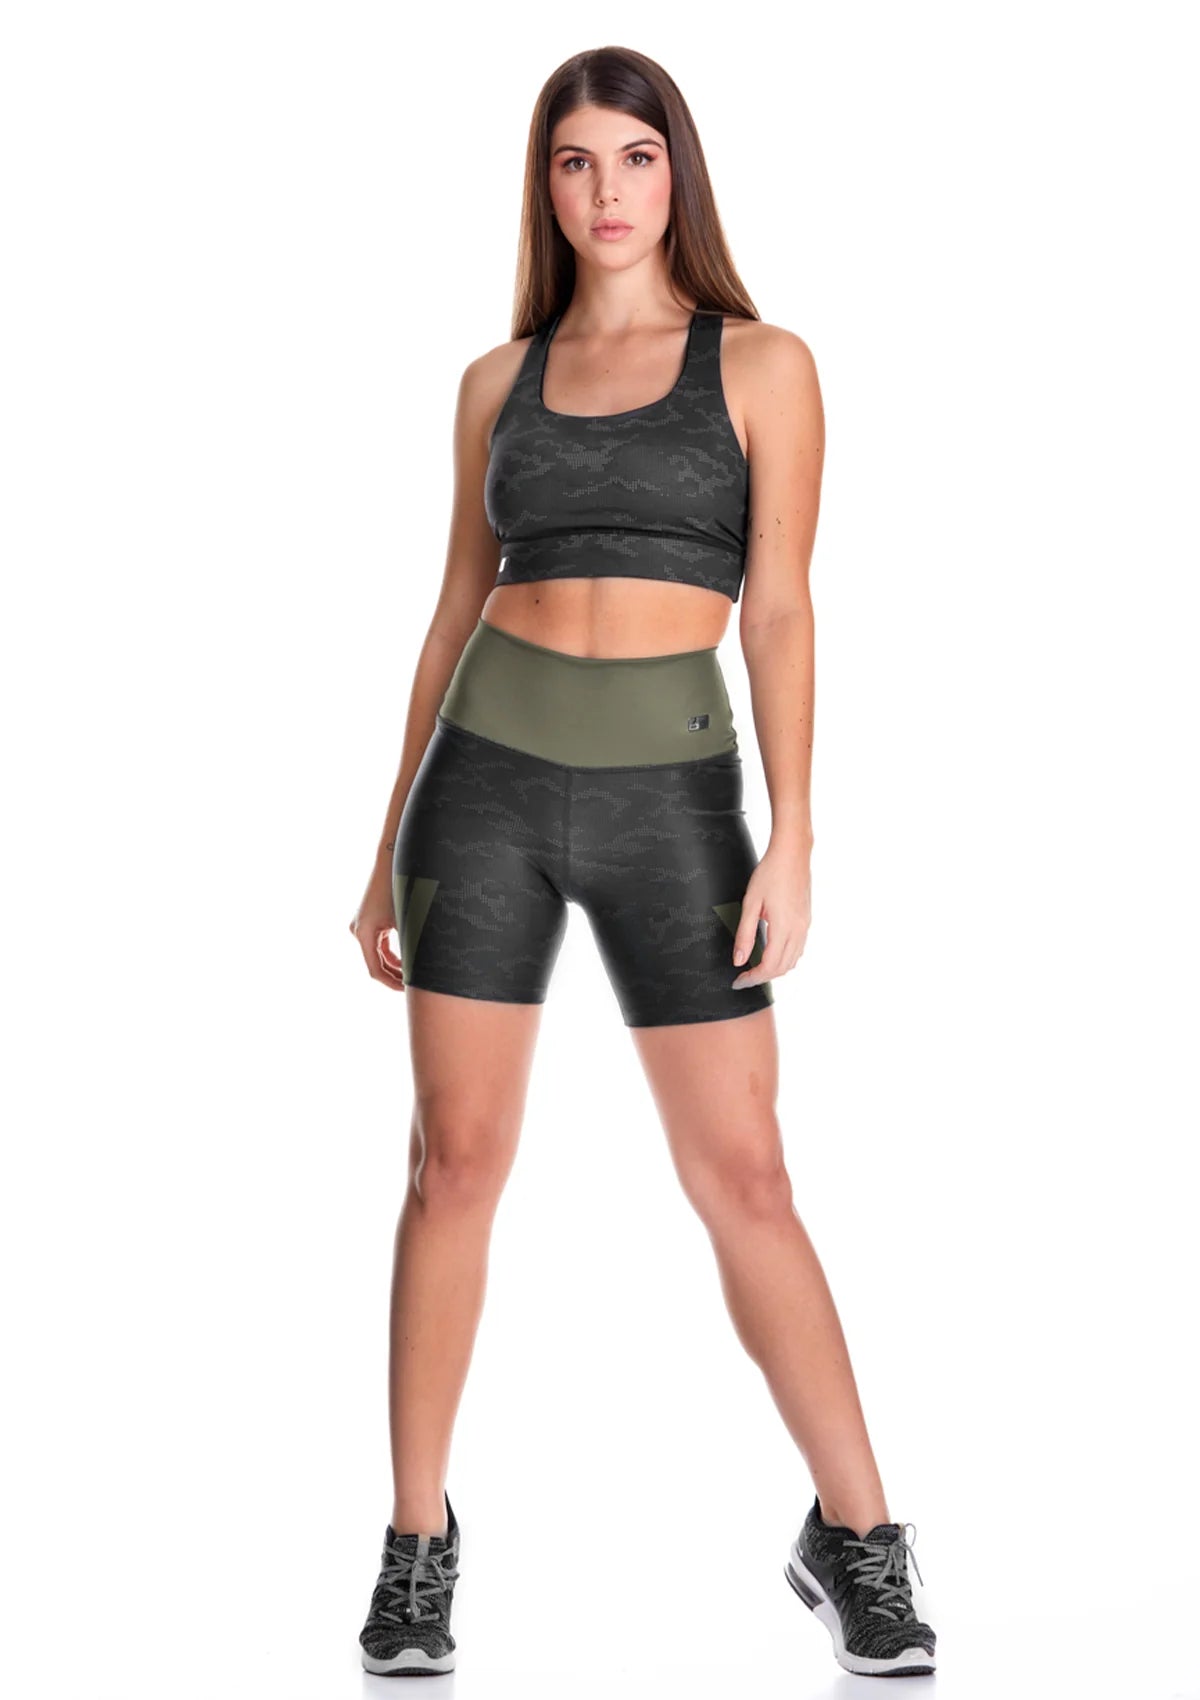 Shorts - Camouflage Design - Running - Gym - Fitness – BEST WEAR - See  Through Shirts - Sheer Nylon Tops - Second Skin - Transparent Pantyhose -  Tights - Plus Size - Women Men